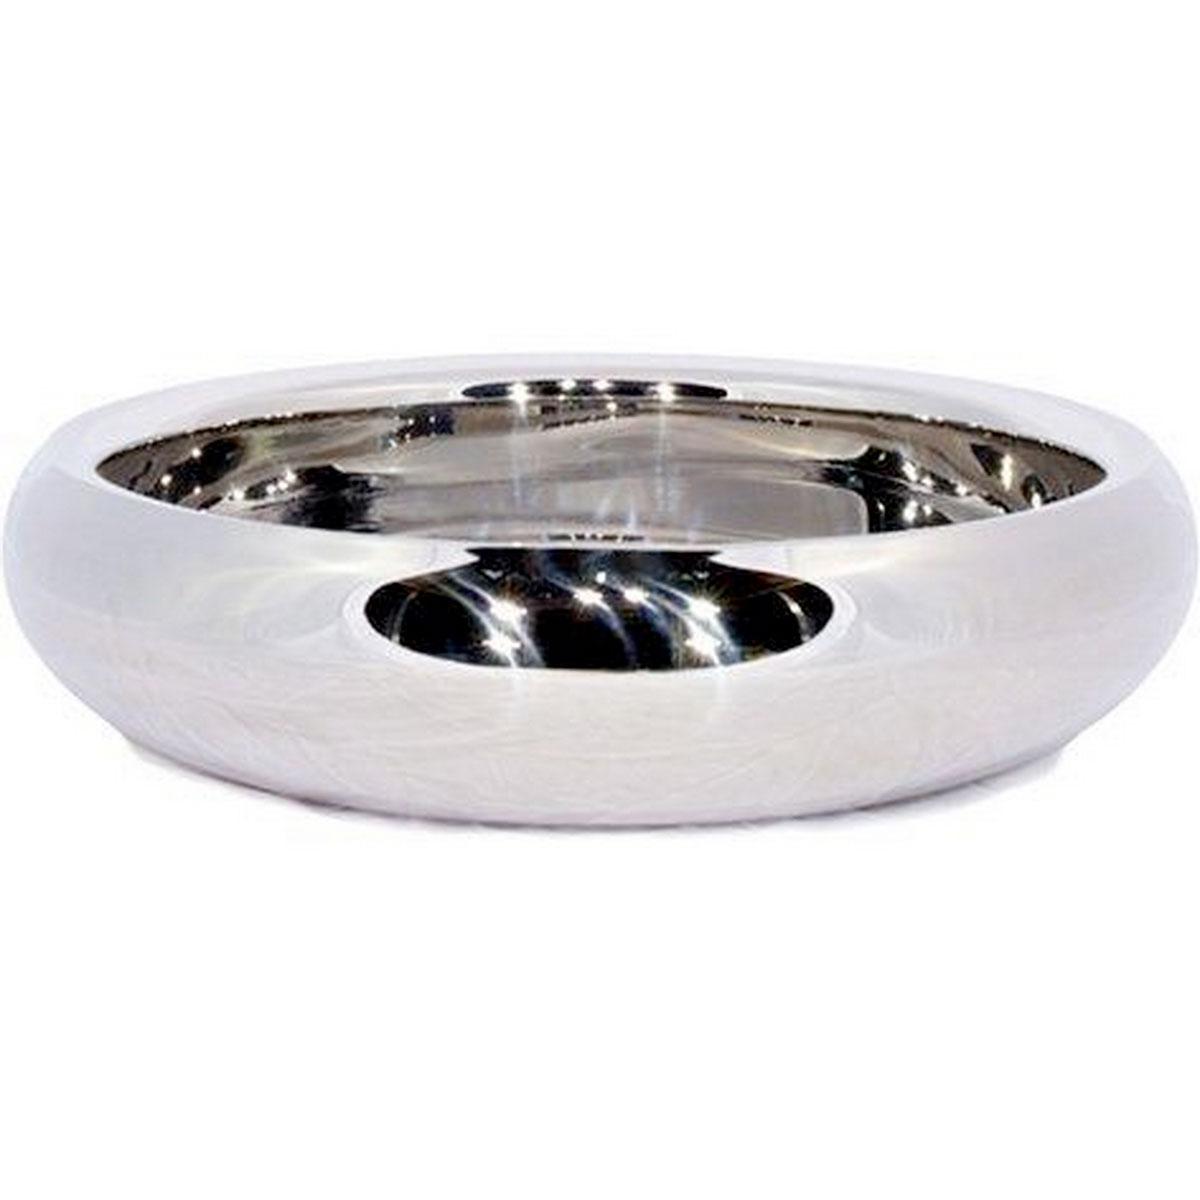 LUCIDO Stainless Steel Bowl Planter